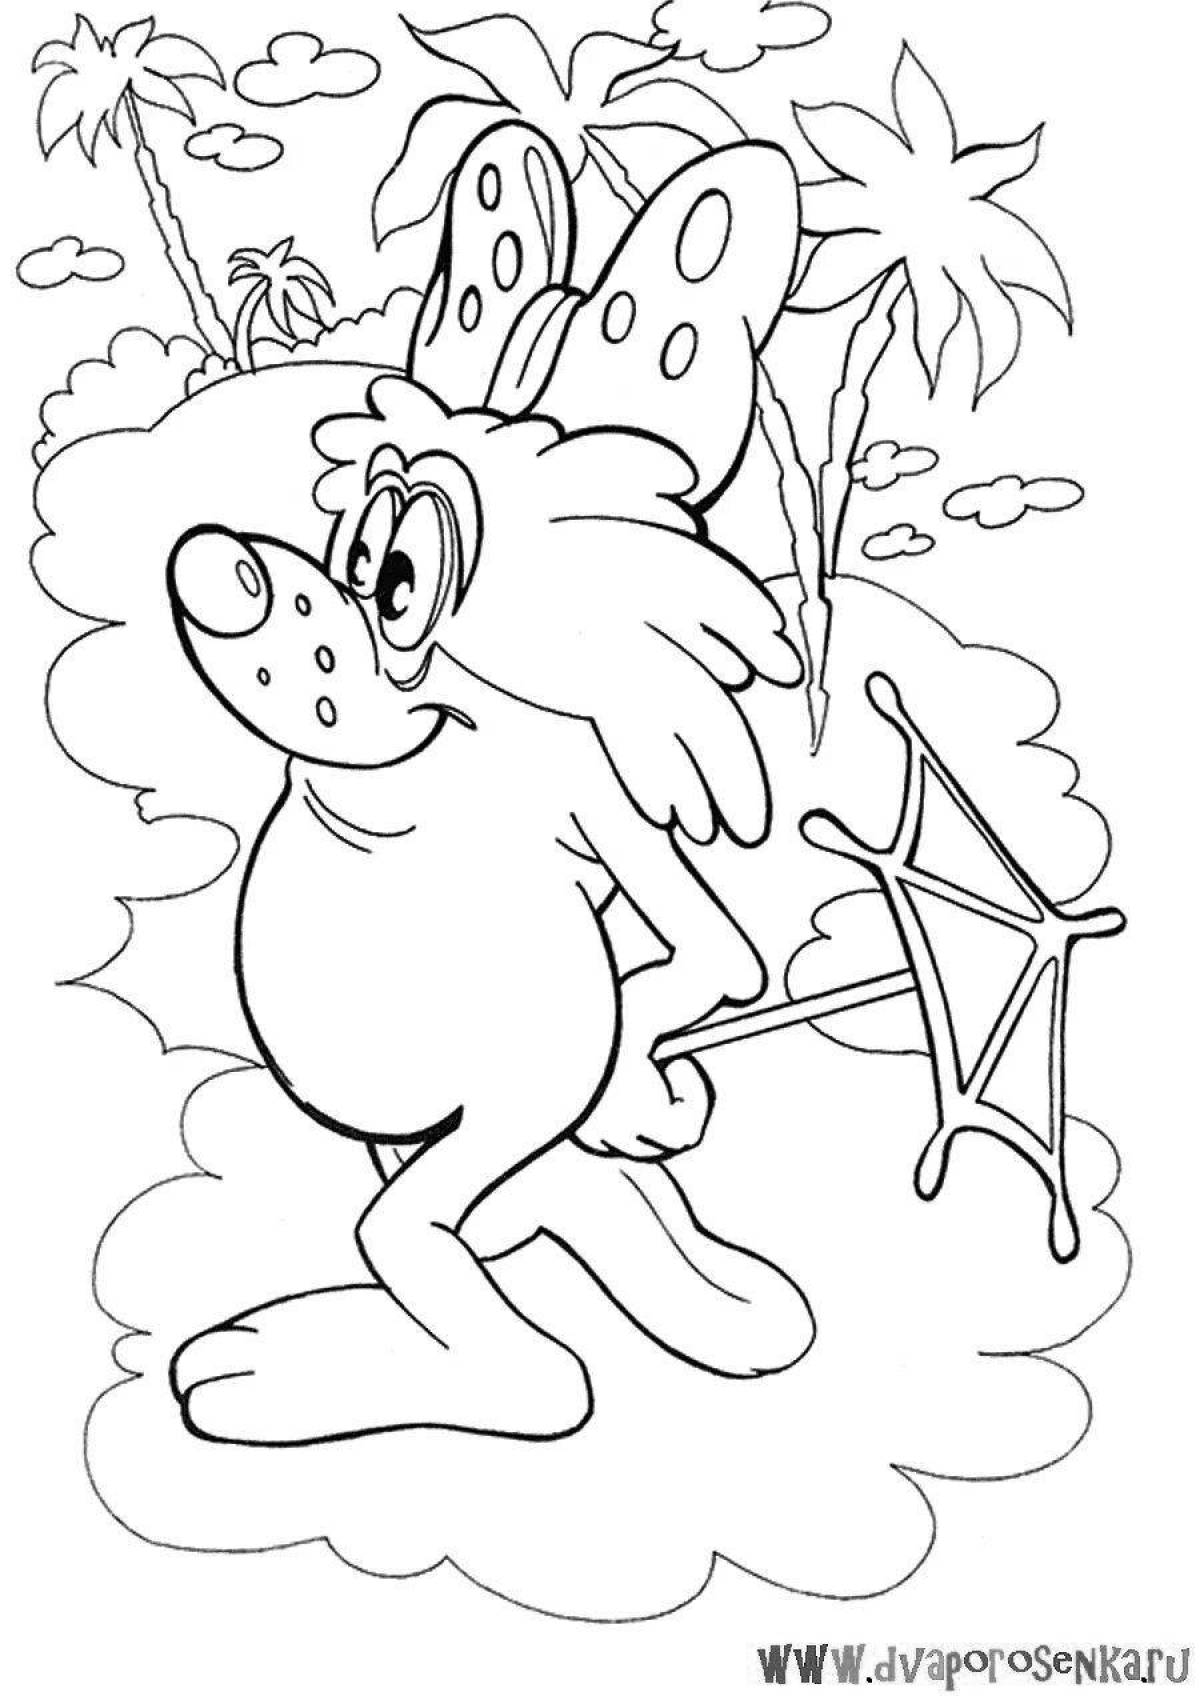 Cute big coloring page oooh